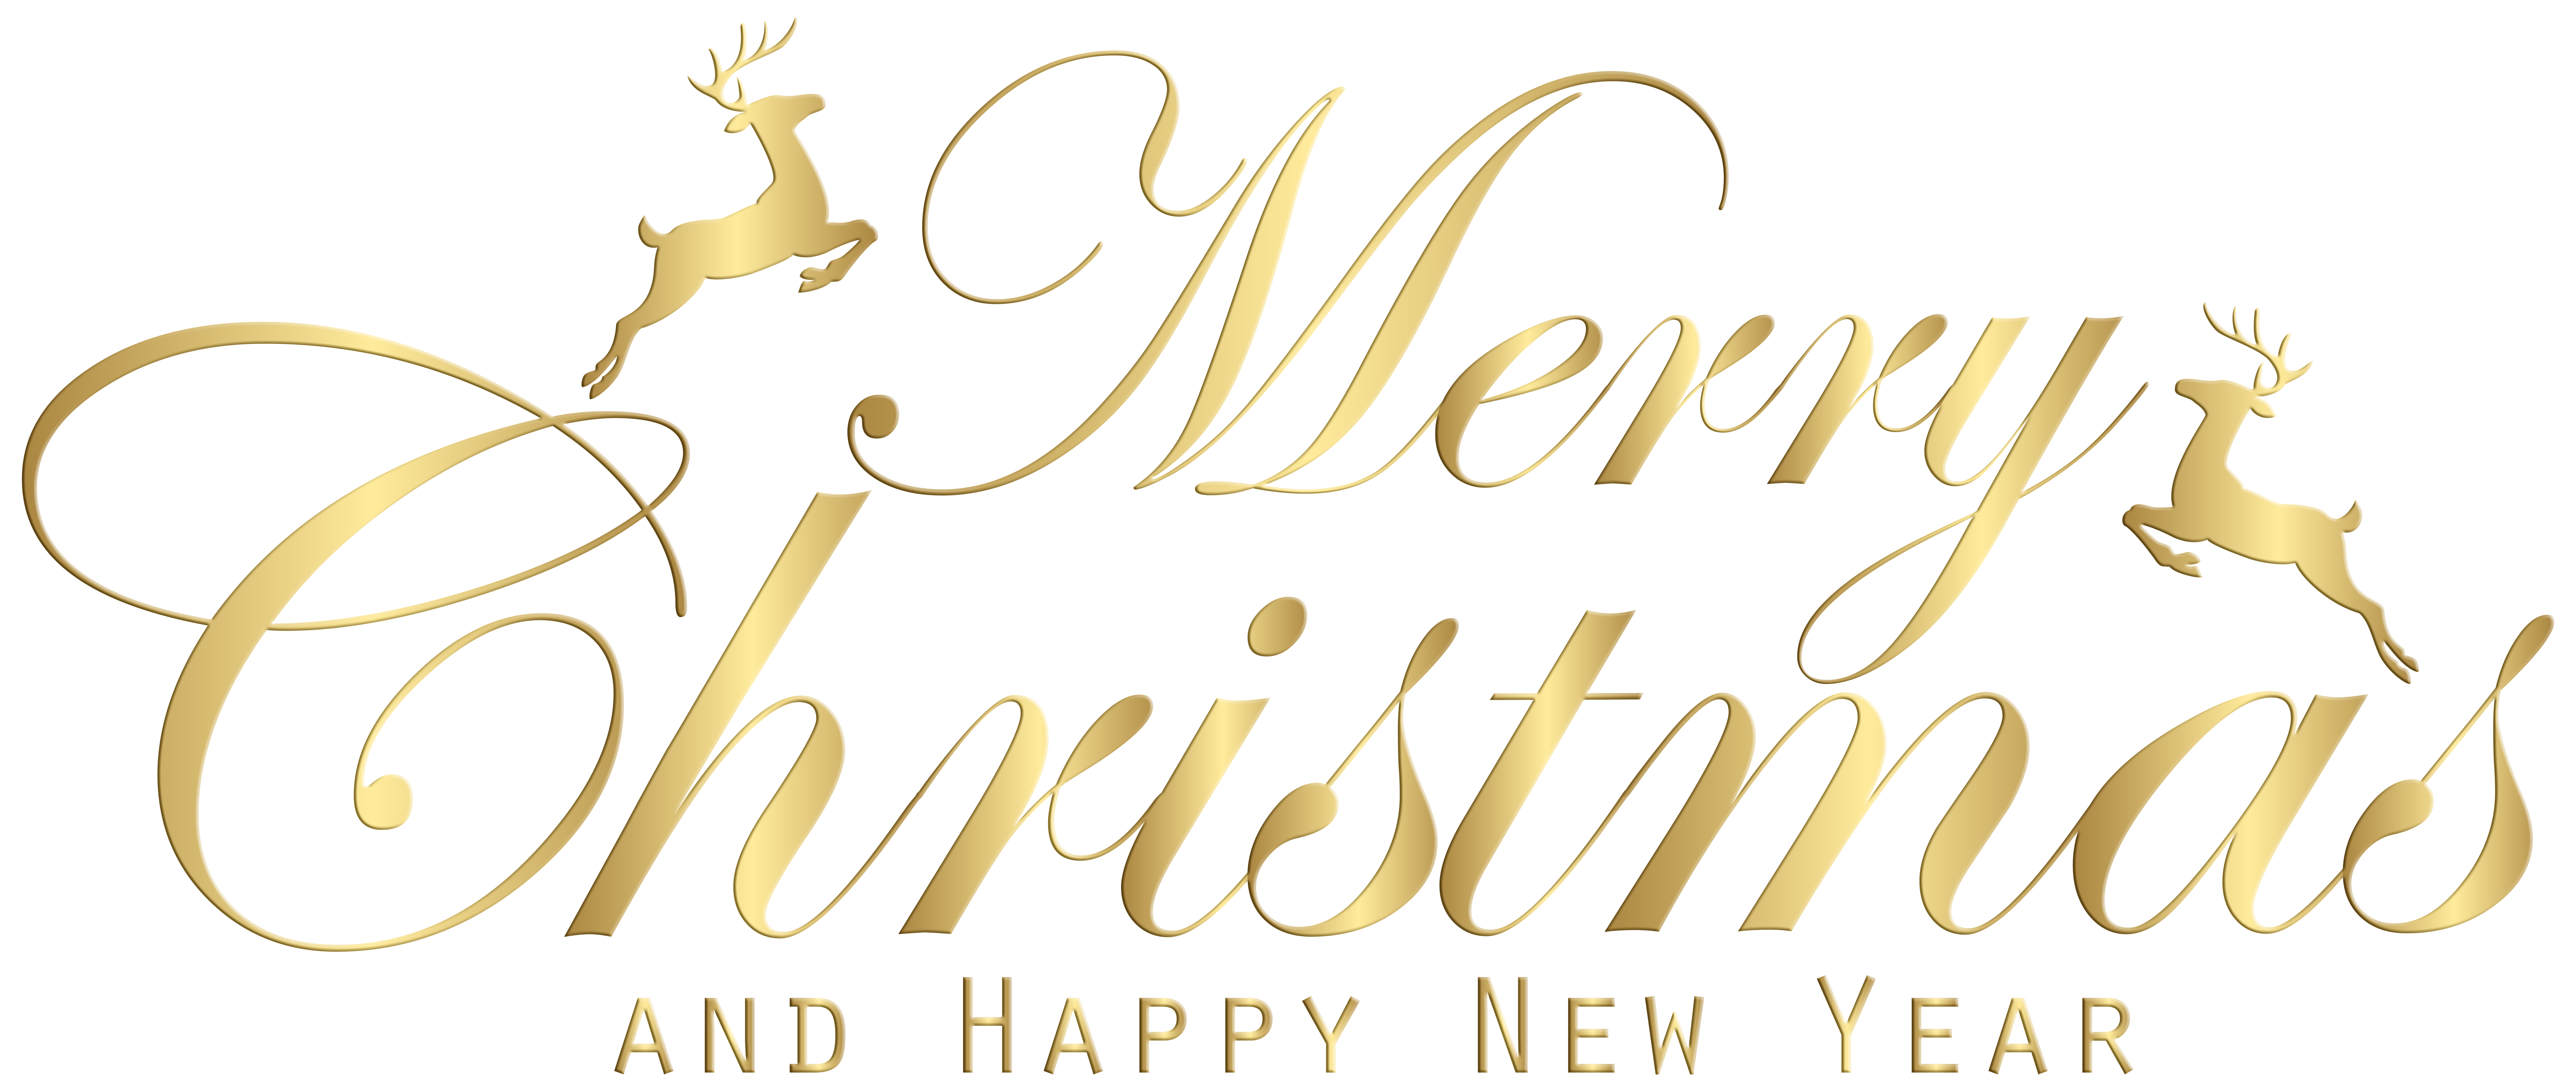 Party Gold Christmas Merry Transparent Free Transparent Image HQ PNG Image